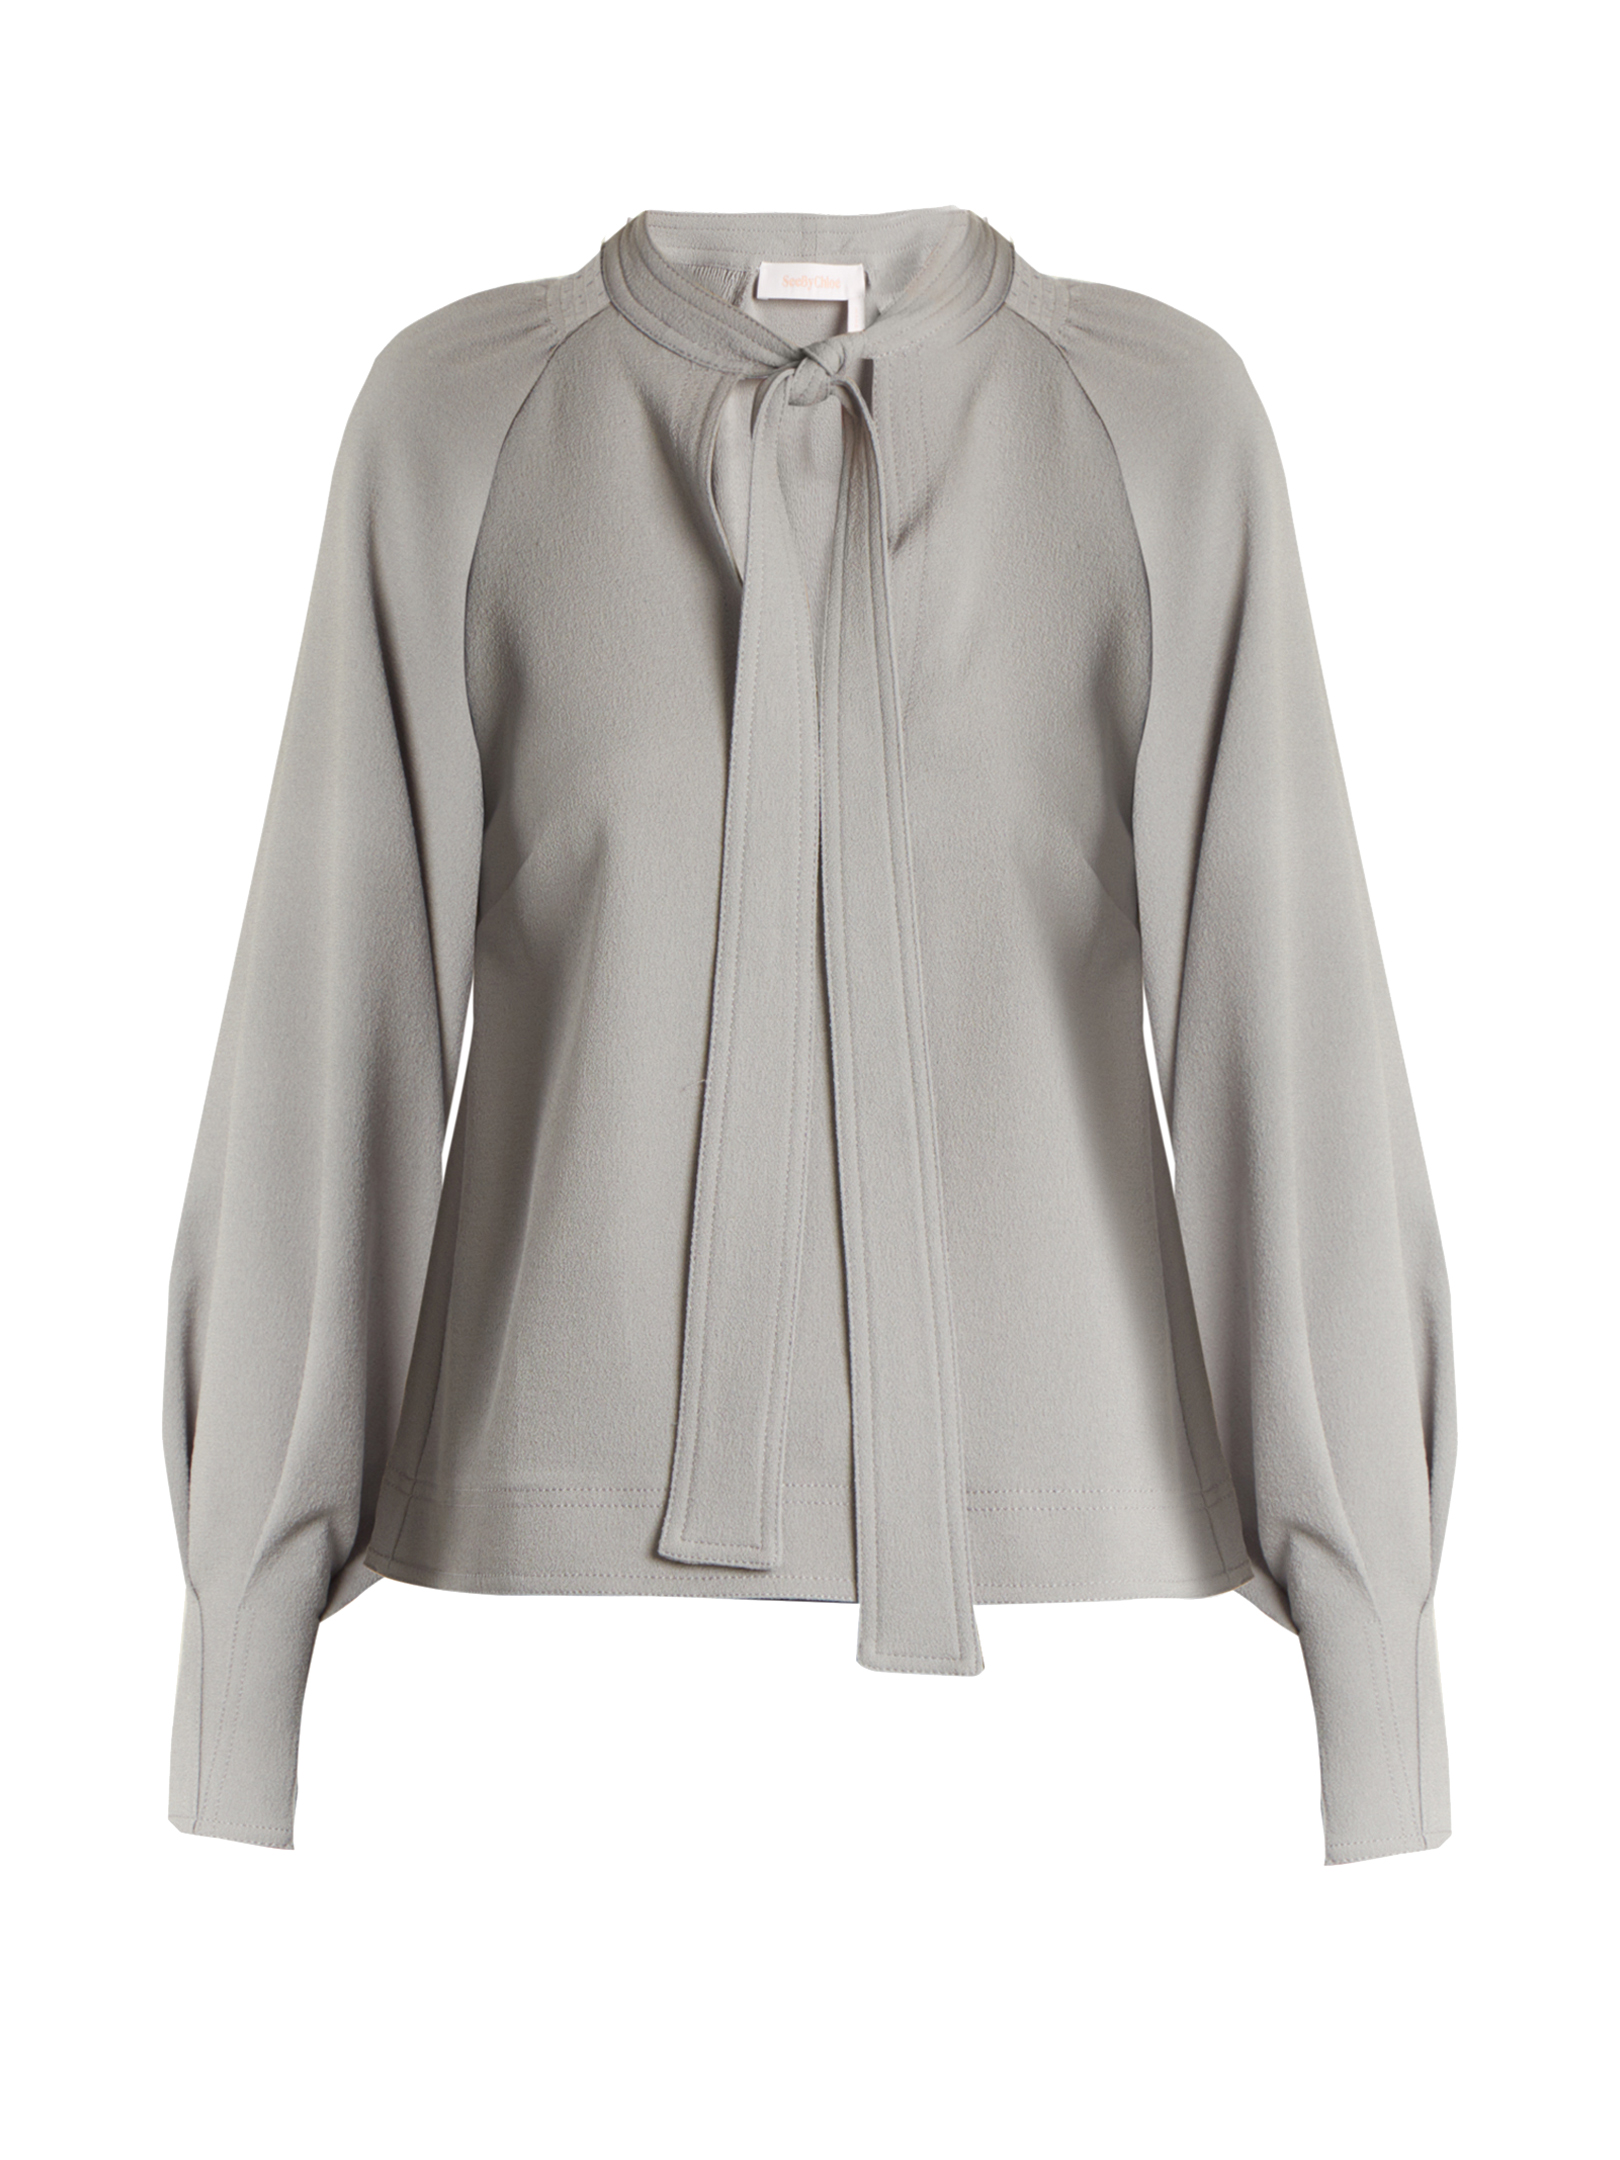 See By Chloé - Tie-Neck Crepe Blouse | ABOUT ICONS